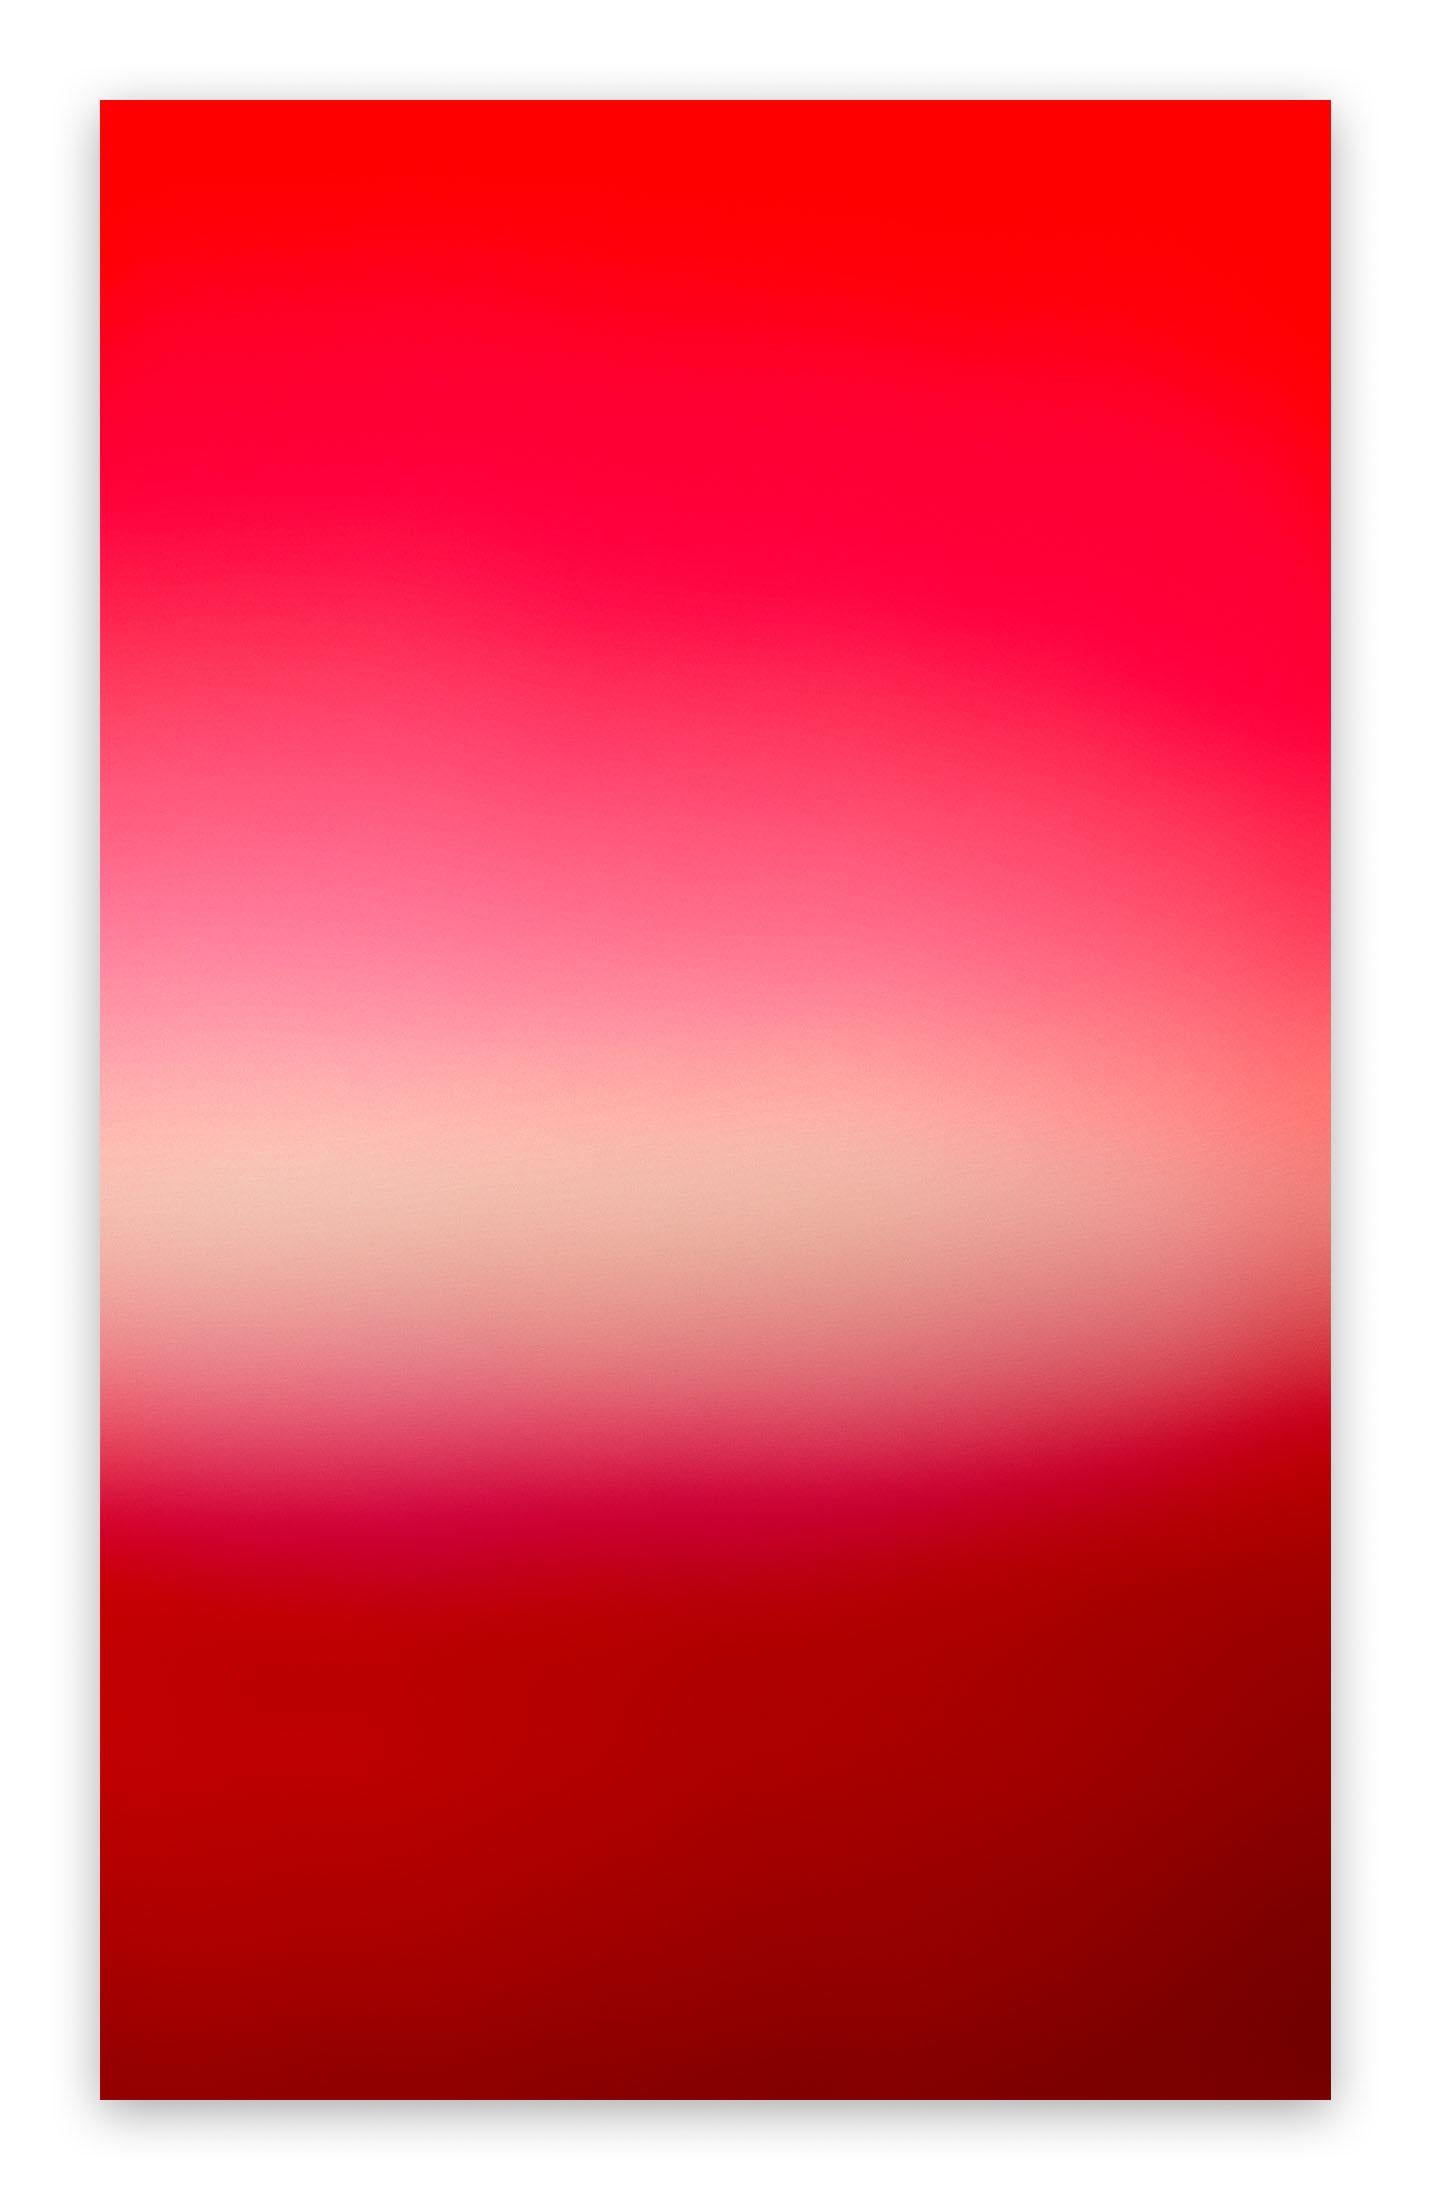 Cosmosis Collages 34A577BC no 126 Red (Abstract Photography) 

Photographic C Prints, printed on Canson Platinè fiber Rag 310g - Unframed

"Edition of 6 + 2Ap  Turnaround time 2-3 weeks, printed on demand.

This artwork will be shipped rolled in a